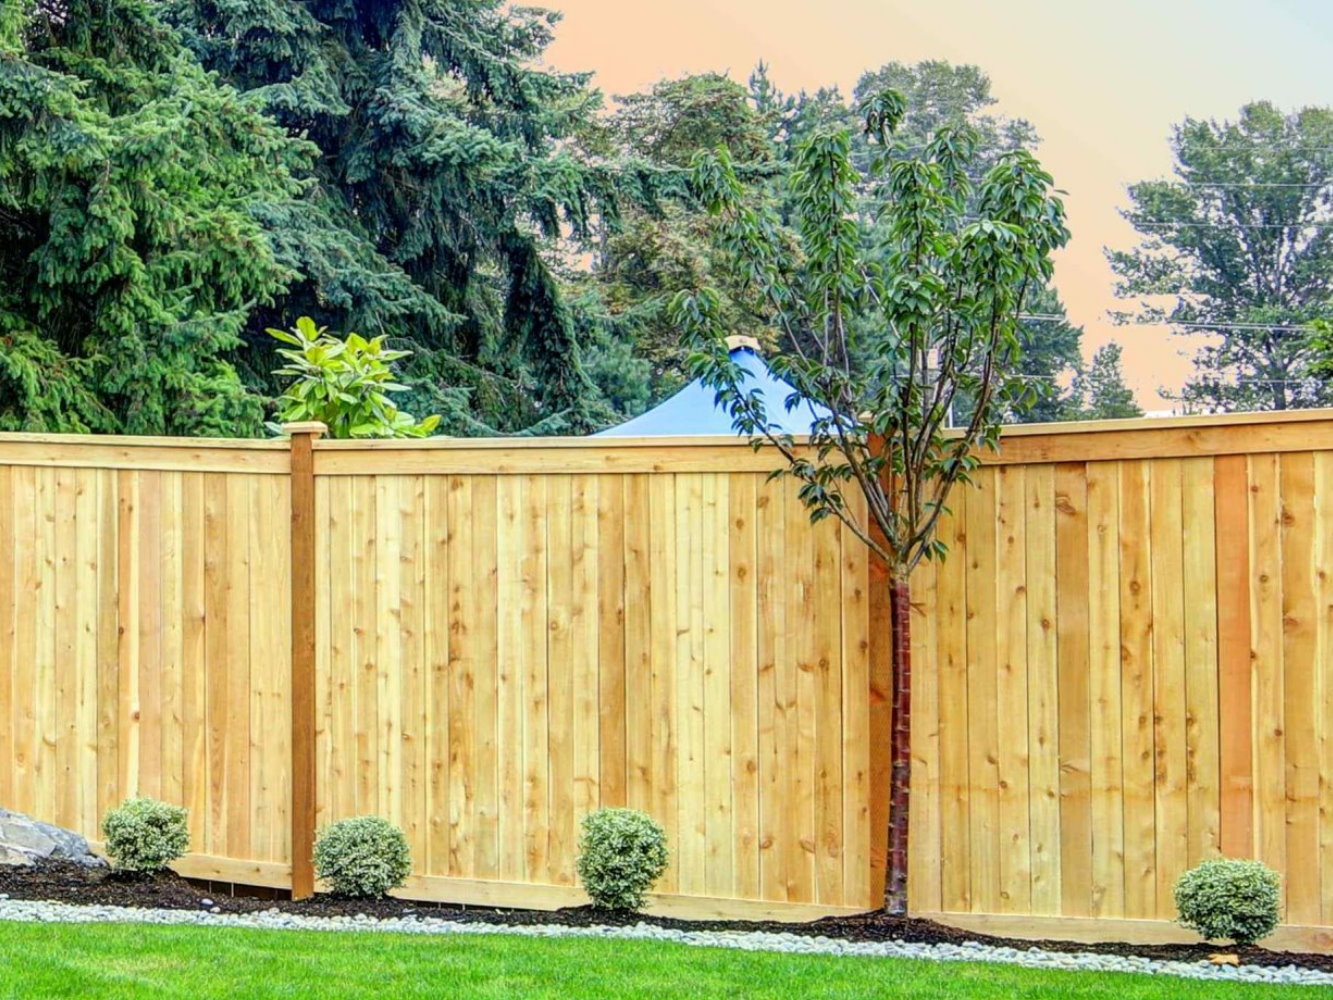 Wilkinson Heights SC cap and trim style wood fence